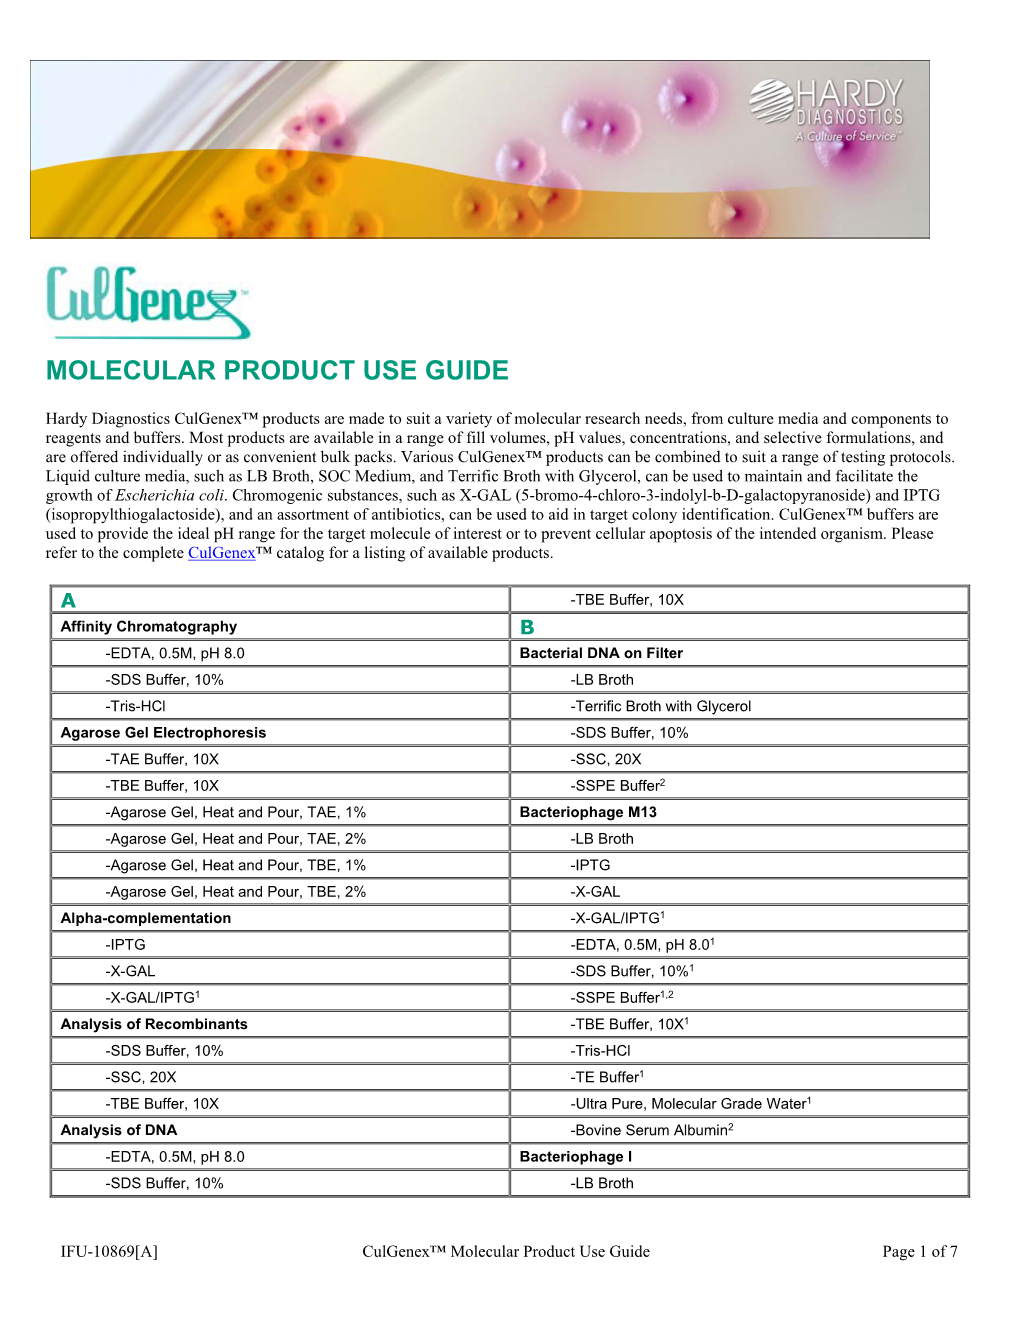 Molecular Product Use Guide